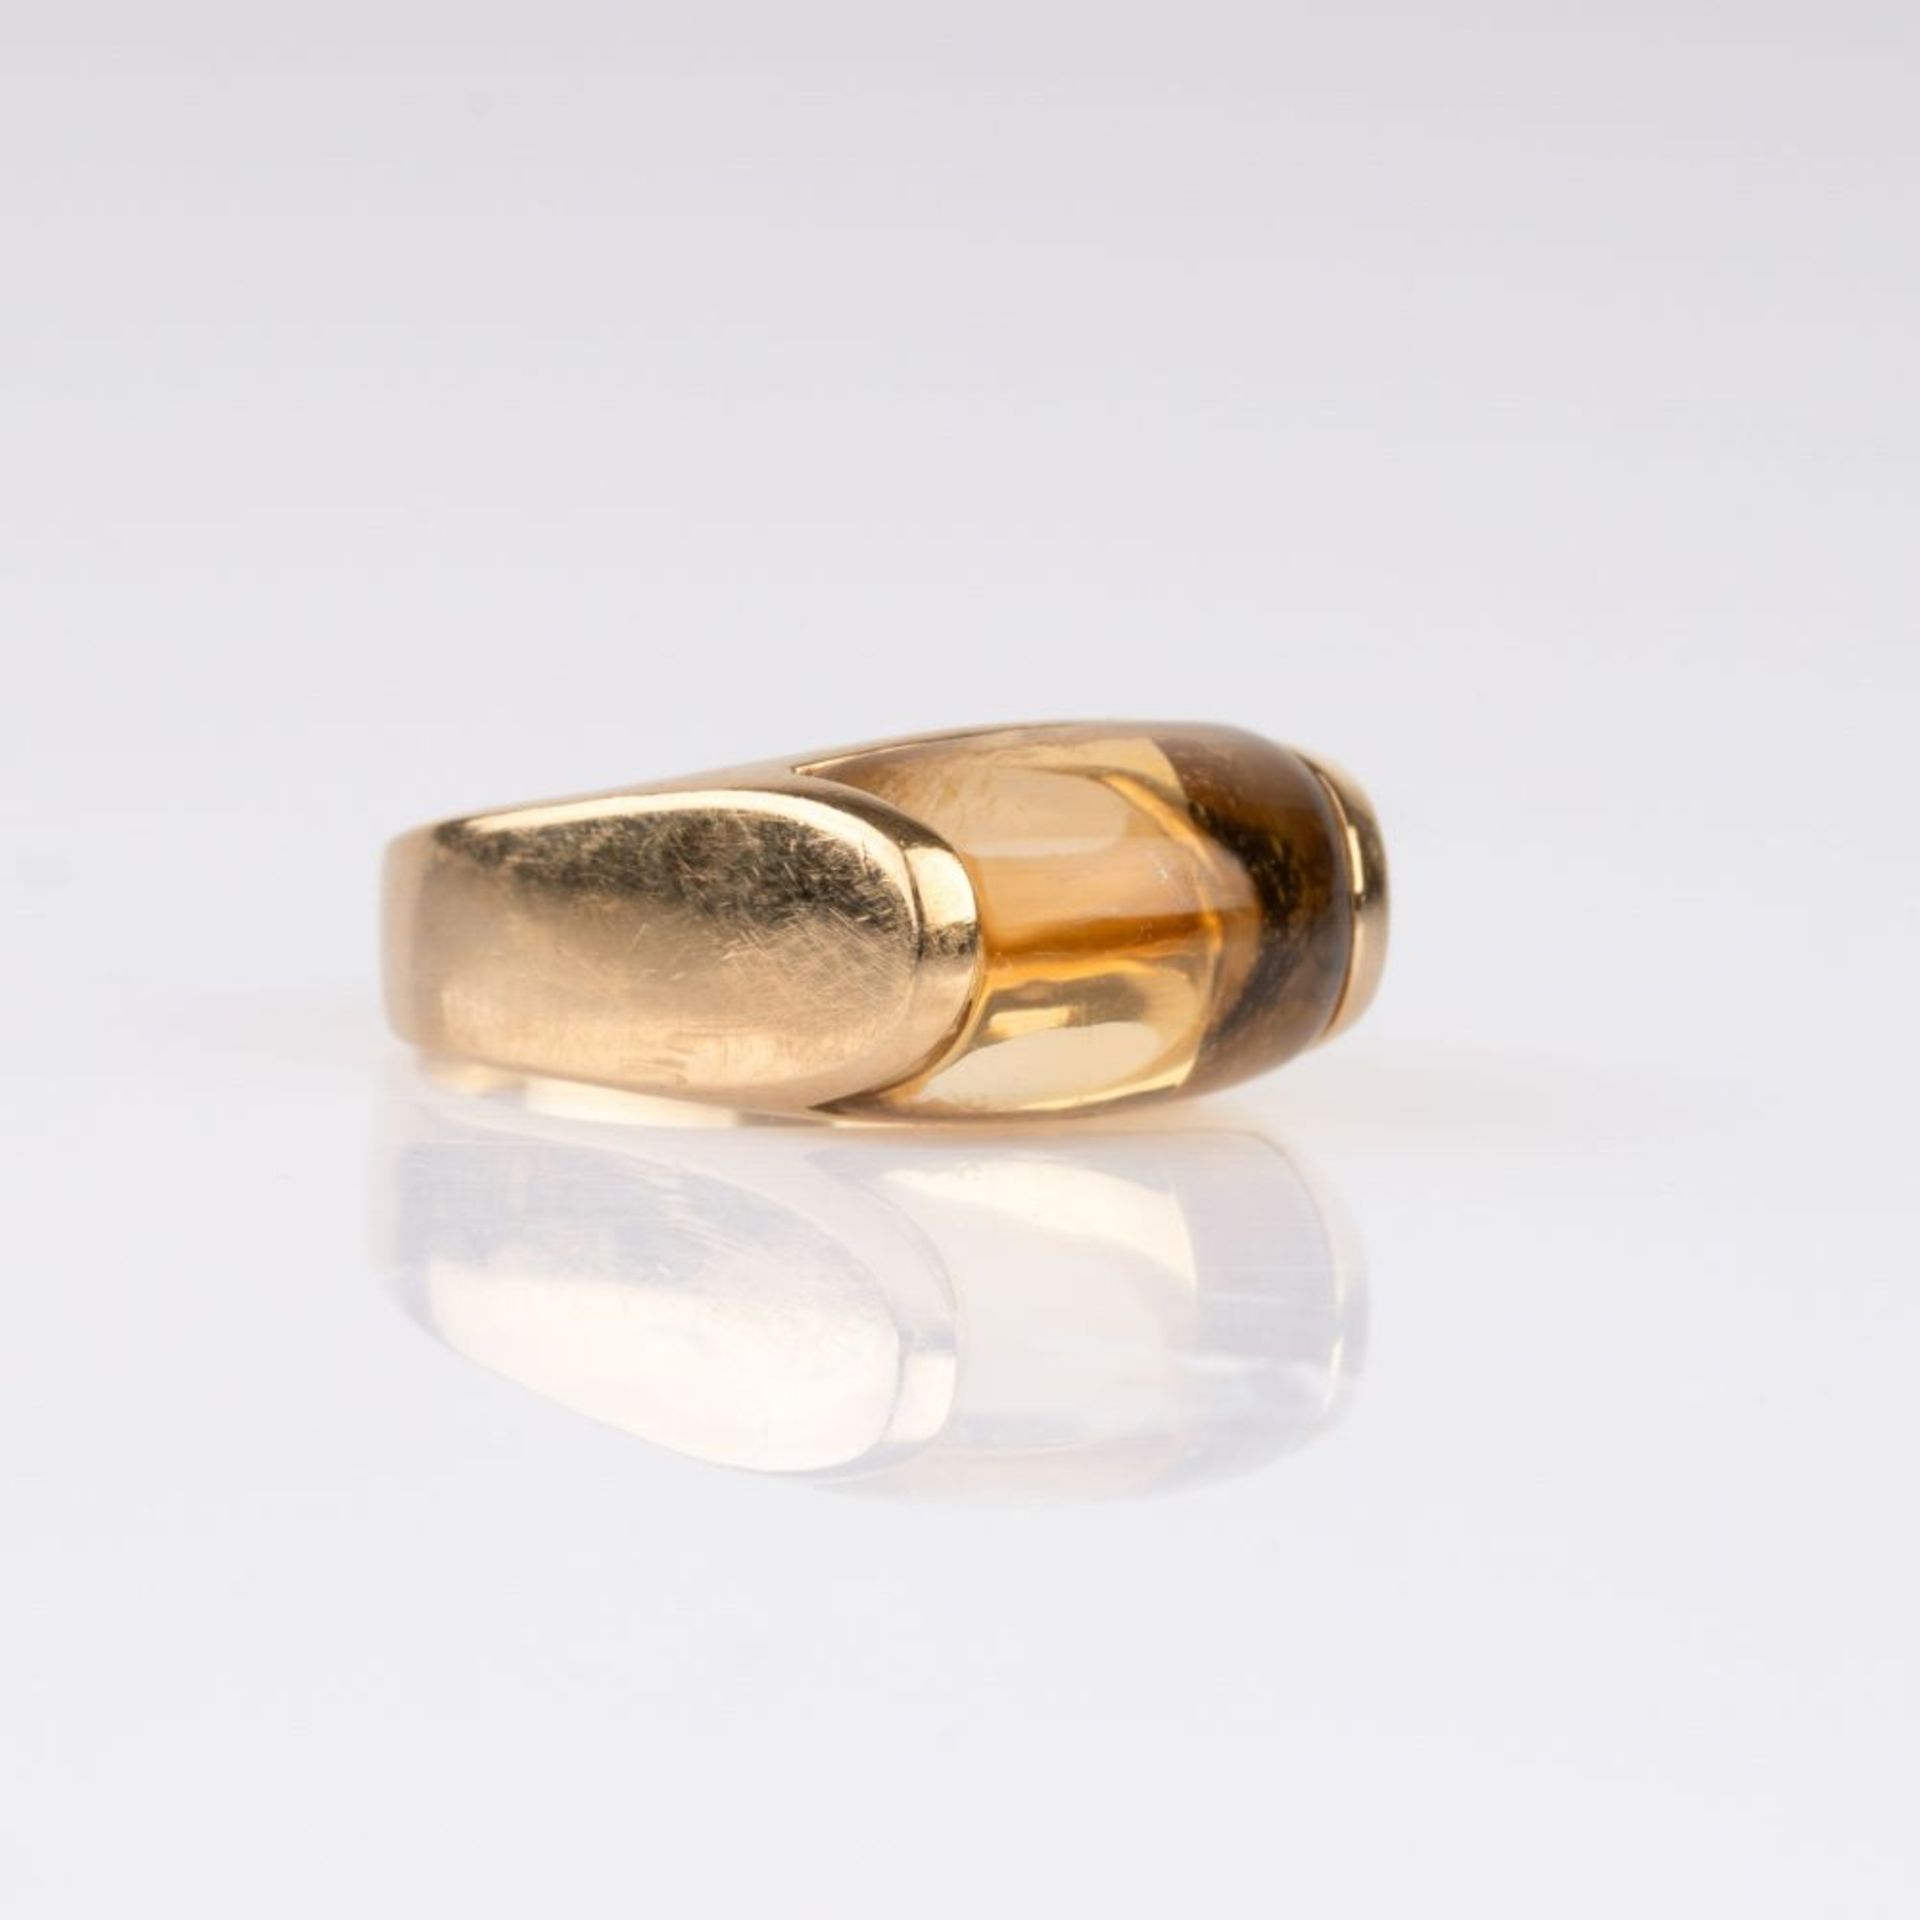 Bulgari. A Gold Ring with Citrine 'Tronchetto'. - Image 2 of 2